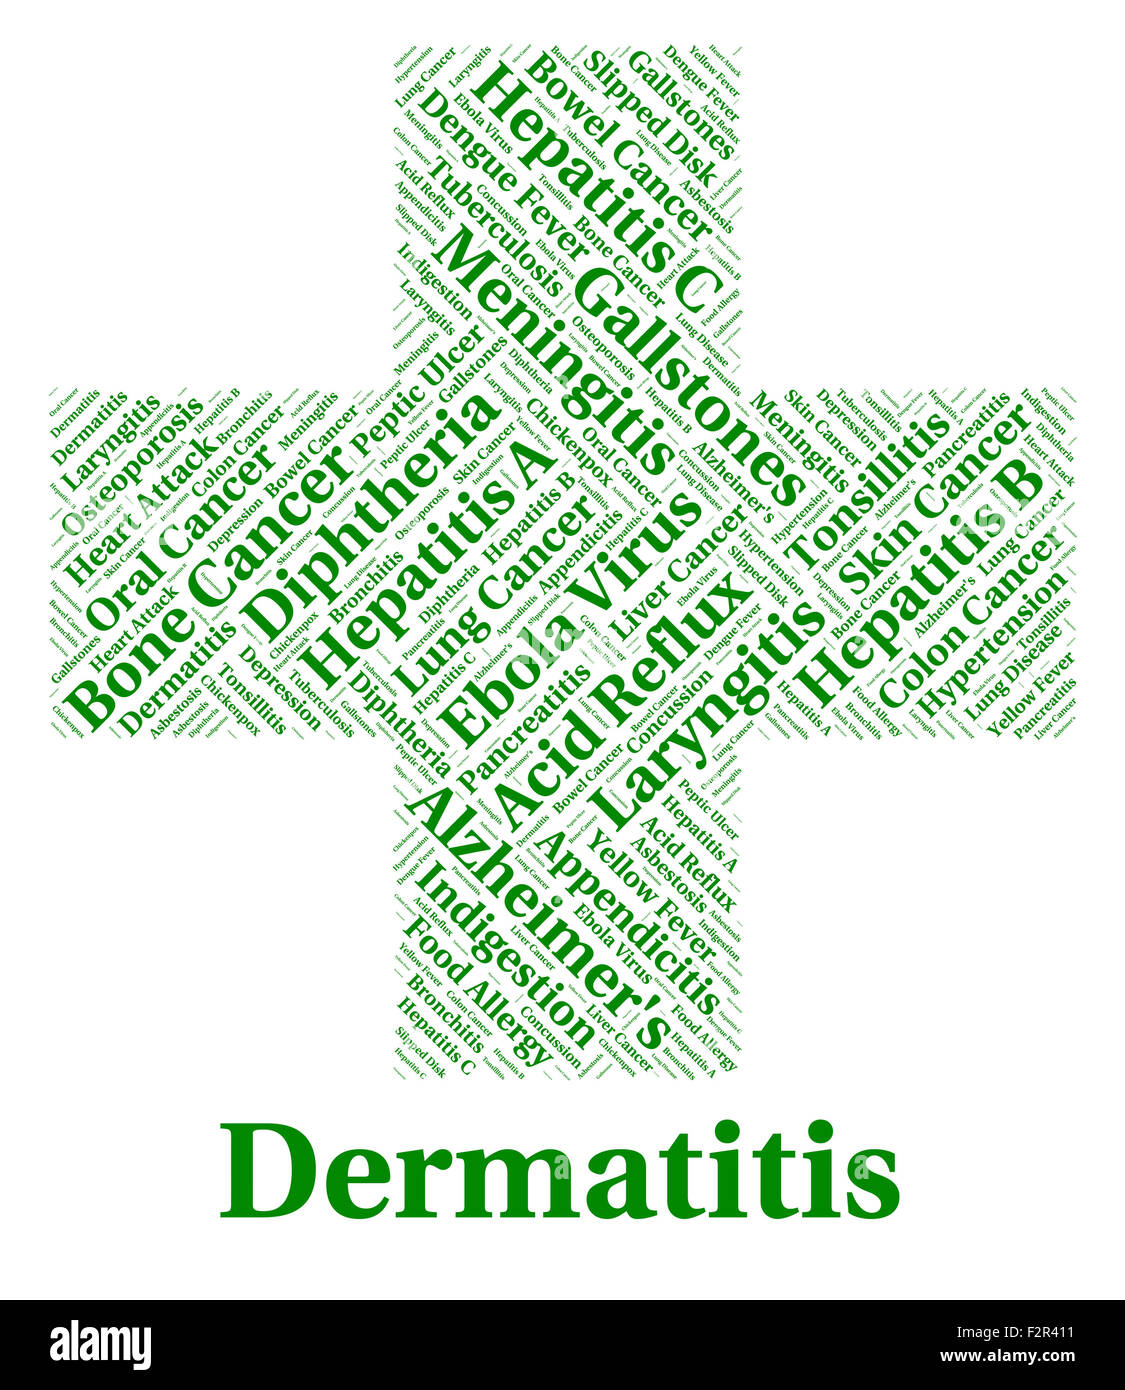 Dermatitis Illness Representing Skin Disease And Infection Stock Photo